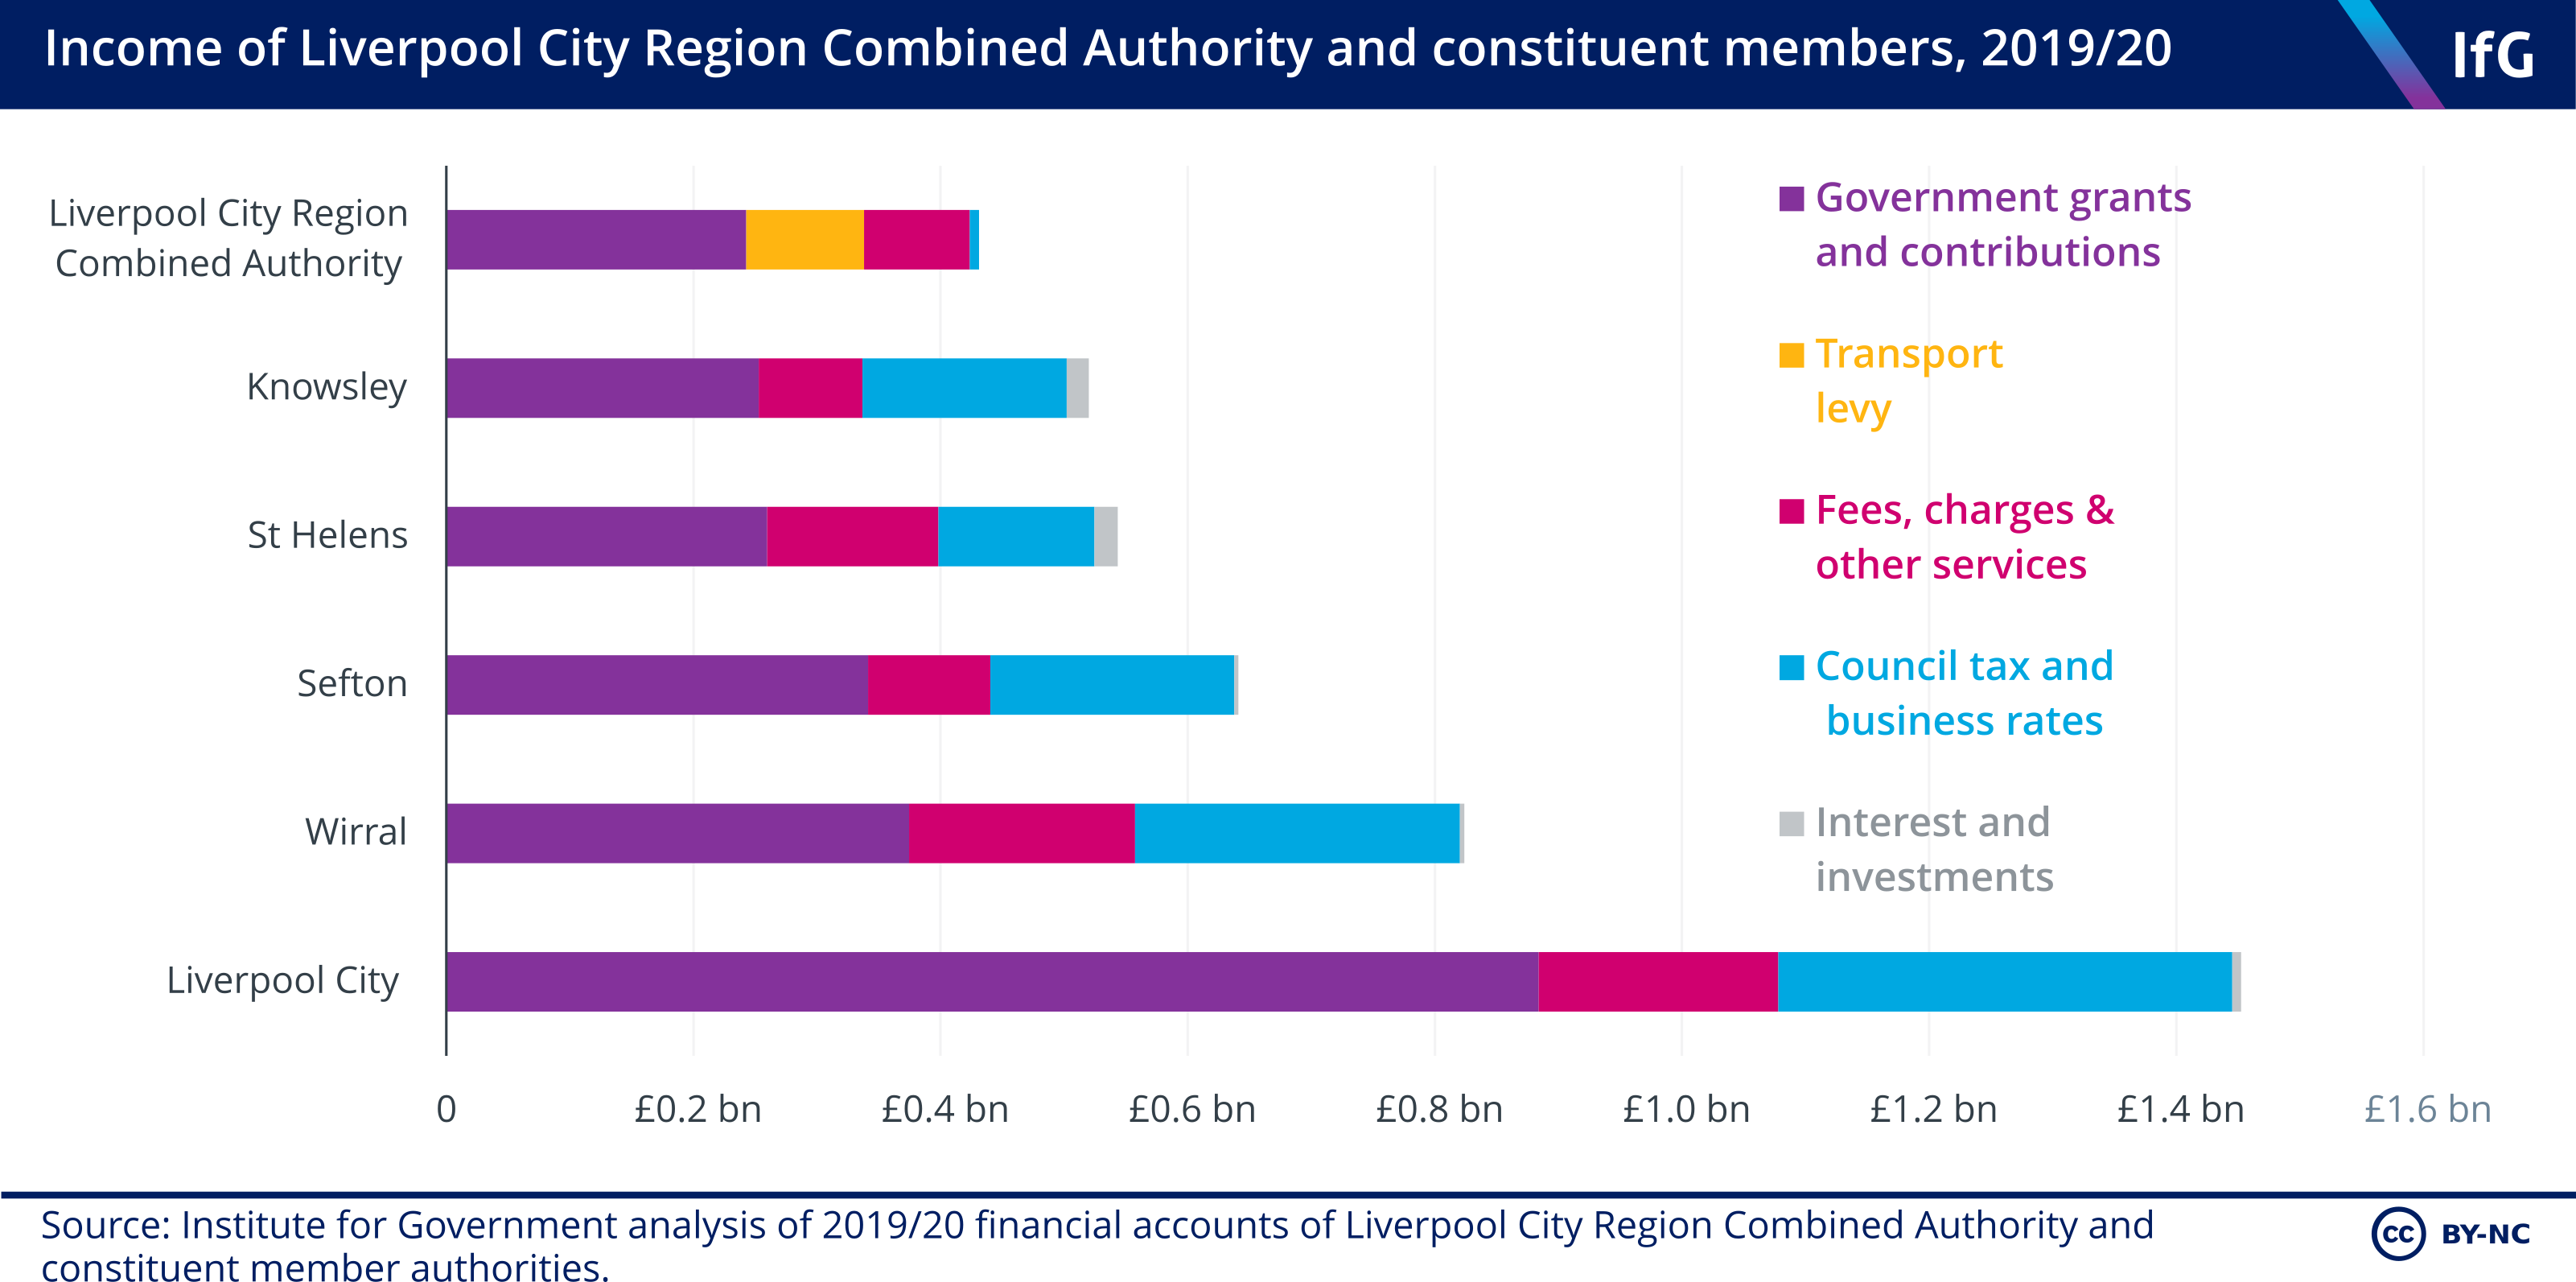 Income of Liverpool City Region Combined Authority and constituent members